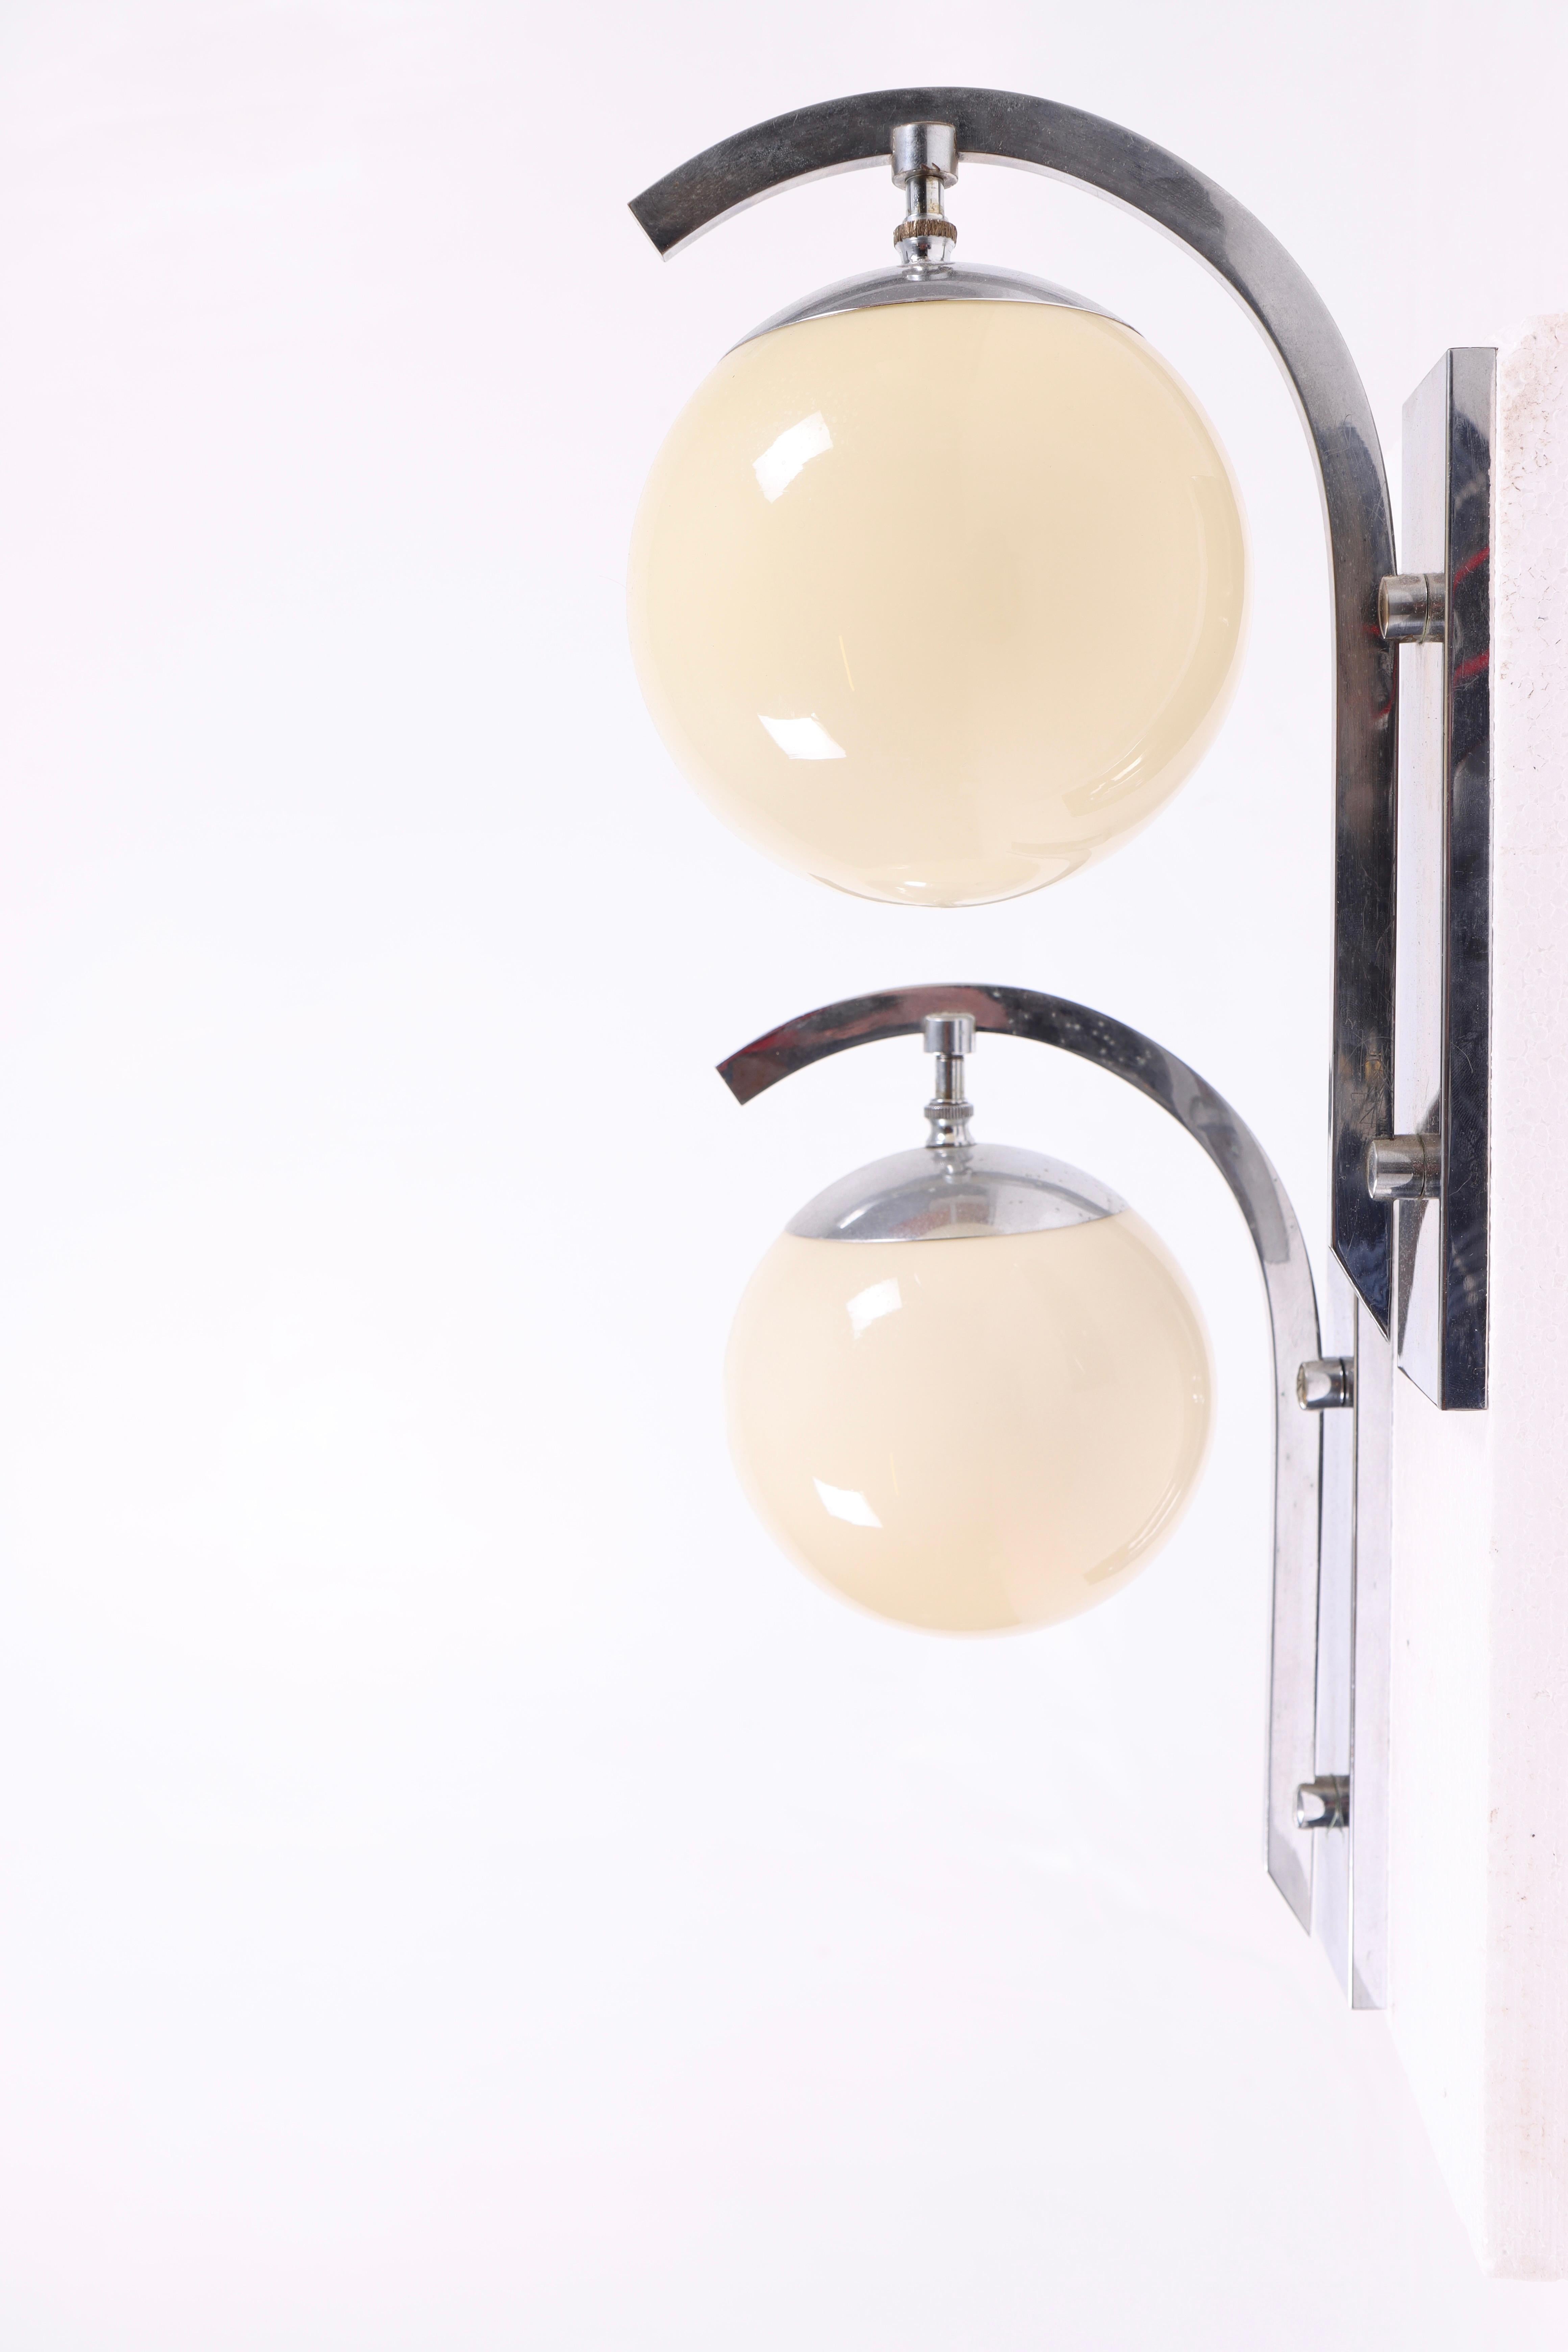 Scandinavian Modern Pair of Art Deco Wall Lamps, Made in Denmark, 1930s For Sale